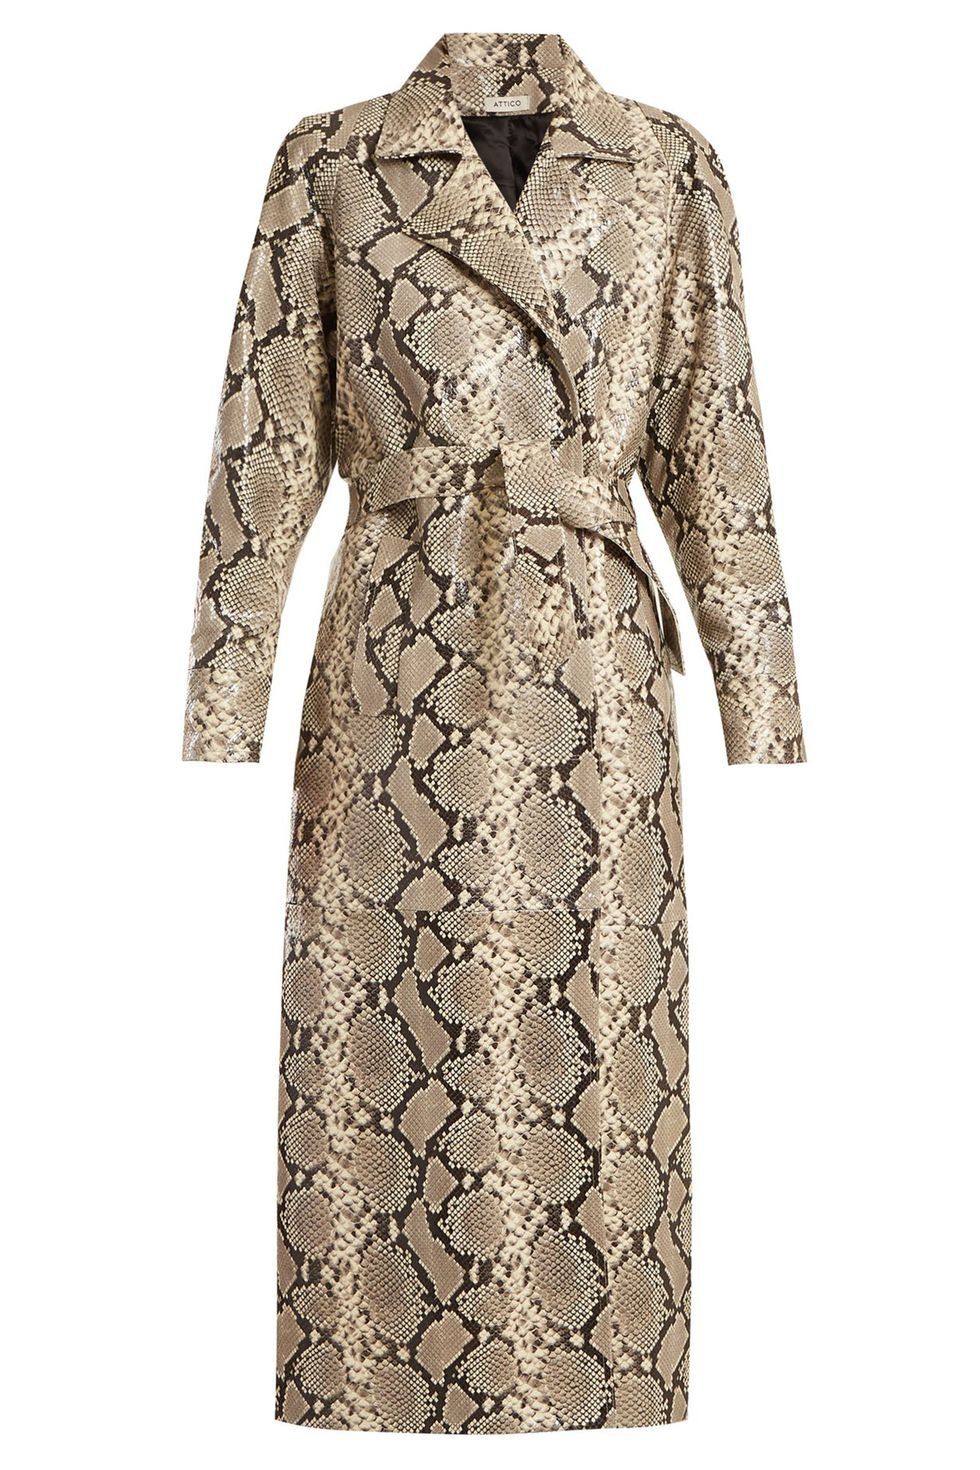 Clothing, Dress, Day dress, Trench coat, Sleeve, Coat, Outerwear, Beige, Robe, Cocktail dress, 